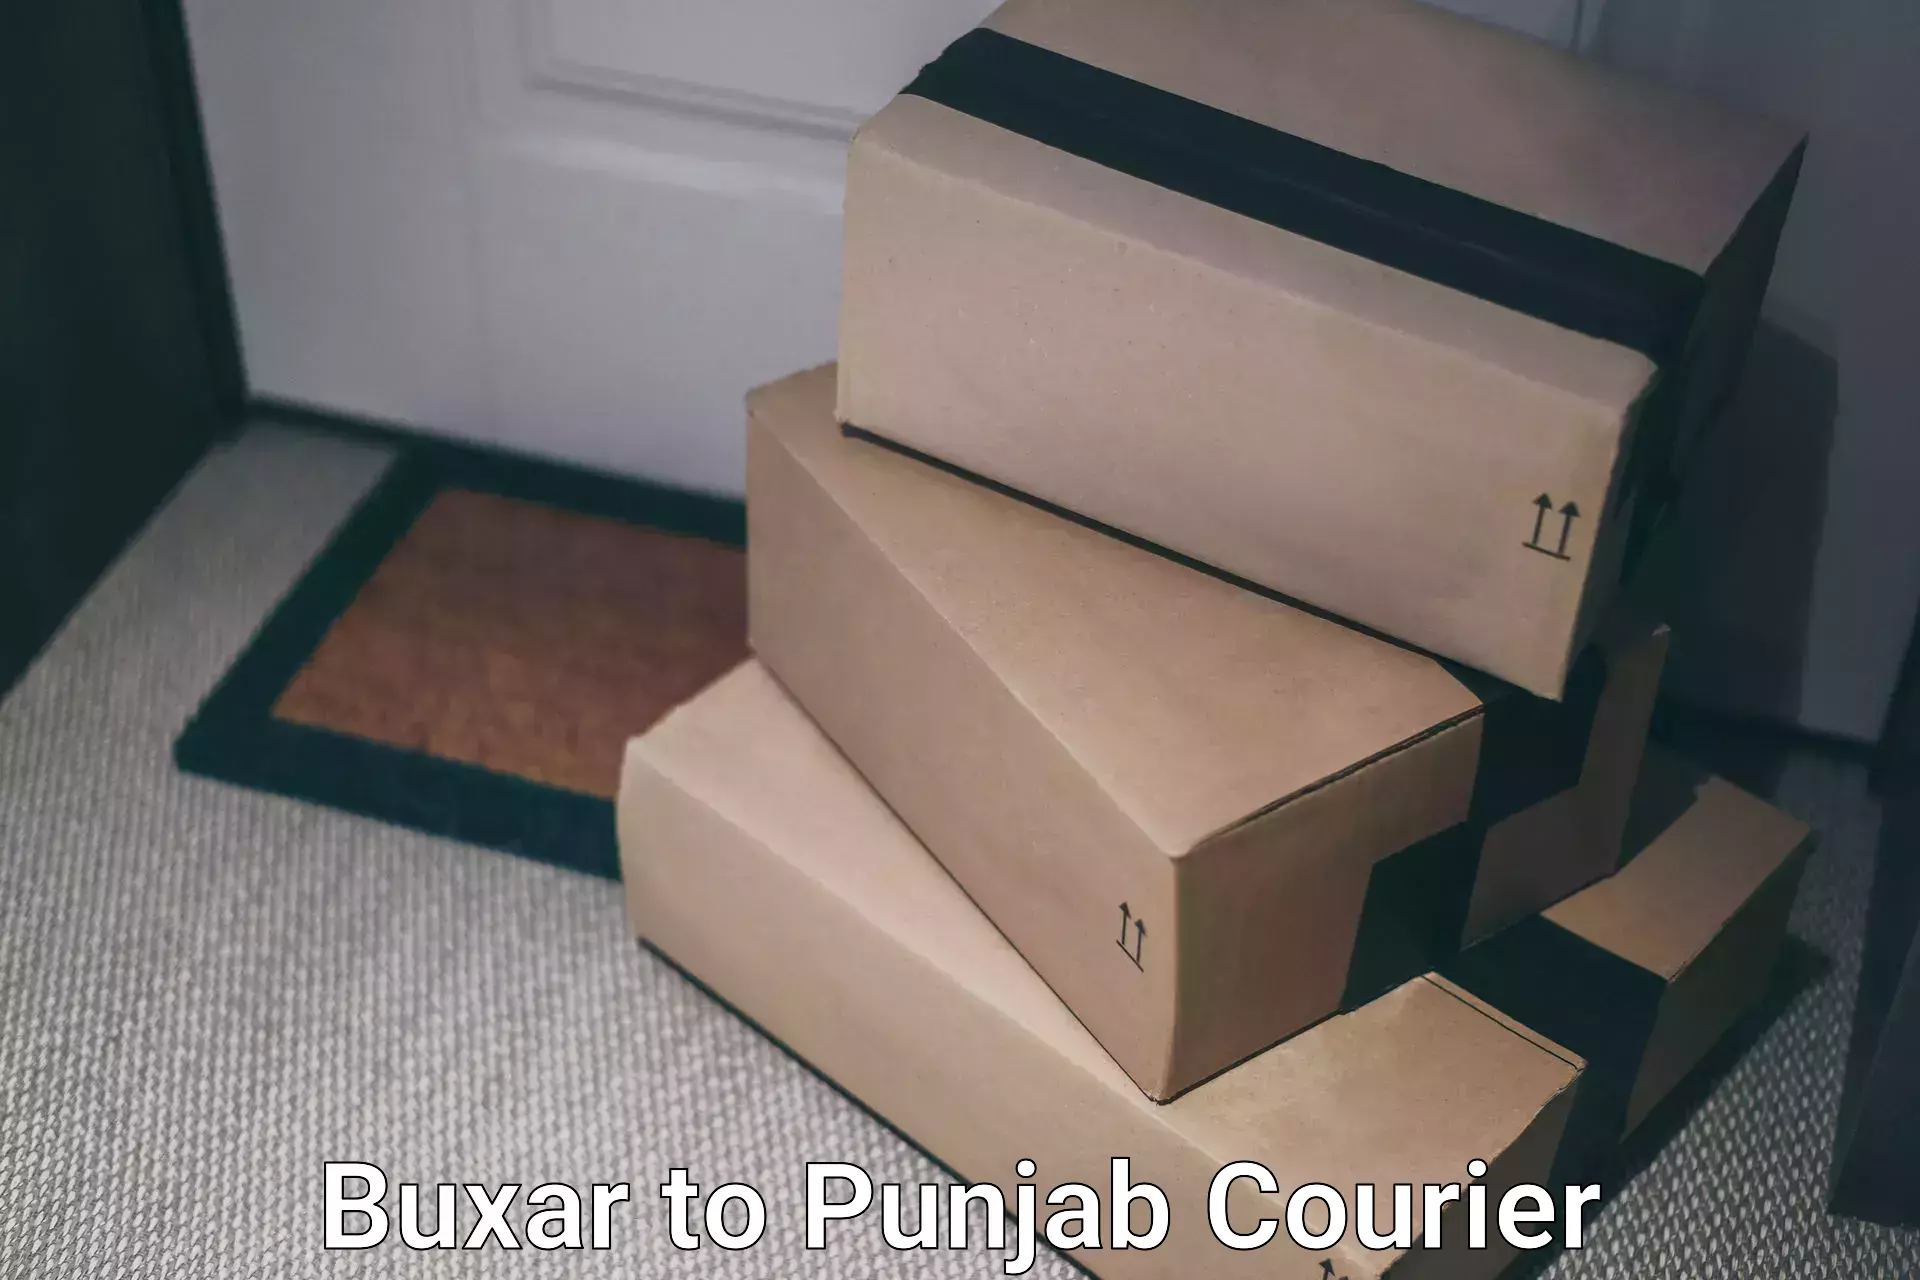 Business delivery service Buxar to Rajpura